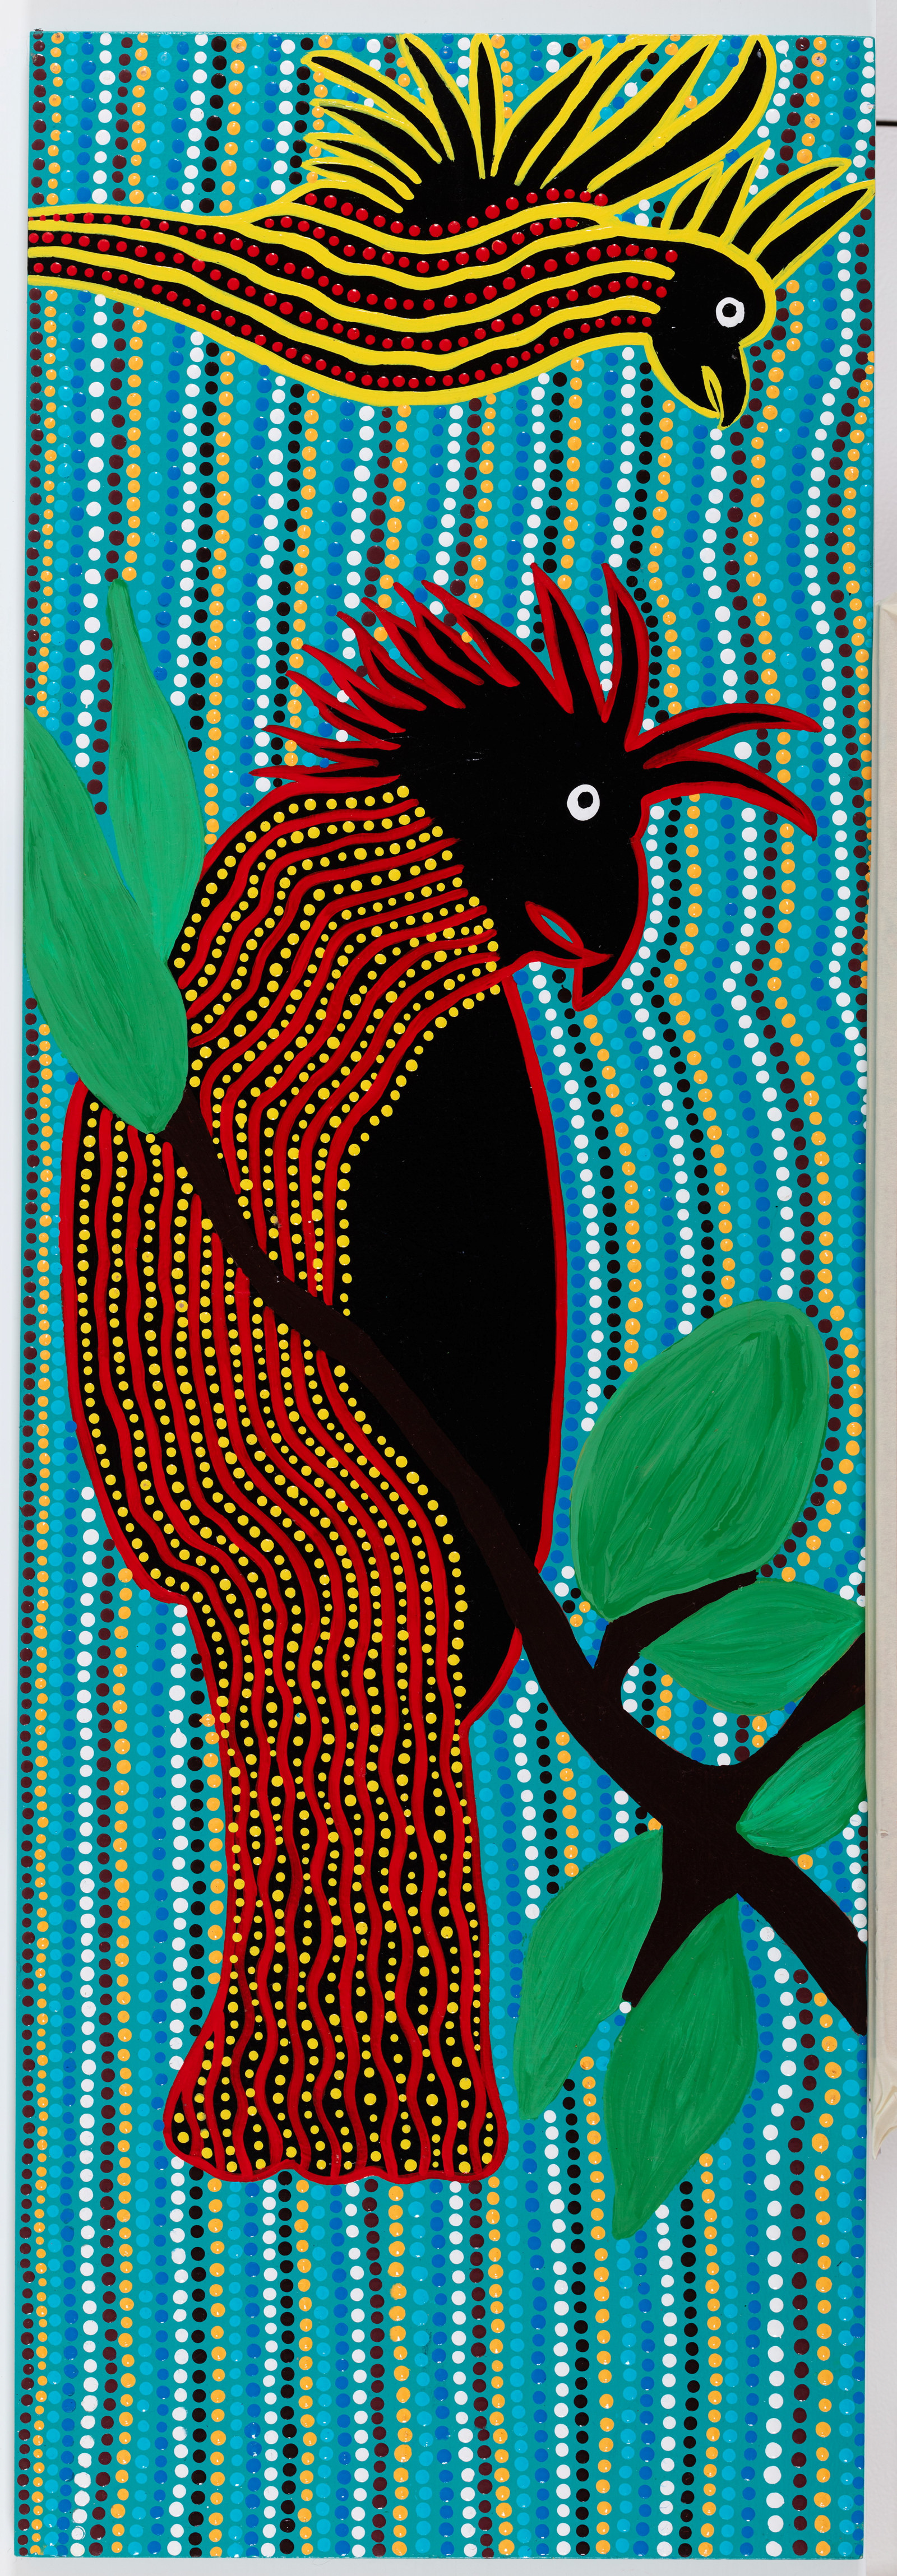 The black cockatoo, Lorraine Brown and Narelle Thomas, with design work by Allison Day, 2022, acrylic on plywood board, 122.5cm x 41cm
The Dreaming Stories tell us of their encounter with the Rainbow of the Dreaming. All the birds wanted to be beautiful colours like the flowers – so they asked the flowers where they got their colours. The flowers told them of the rainbow and how it gave them their colours – so the birds waited for the day when the rainbow would return. When it came they dipped in and out of the rainbow’s beautiful colours to become bright and beautiful. But the crows and cockatoos missed out and remain the colours they are today. One of our beautiful birds – we hear their calls after the storms or in the dry weather.